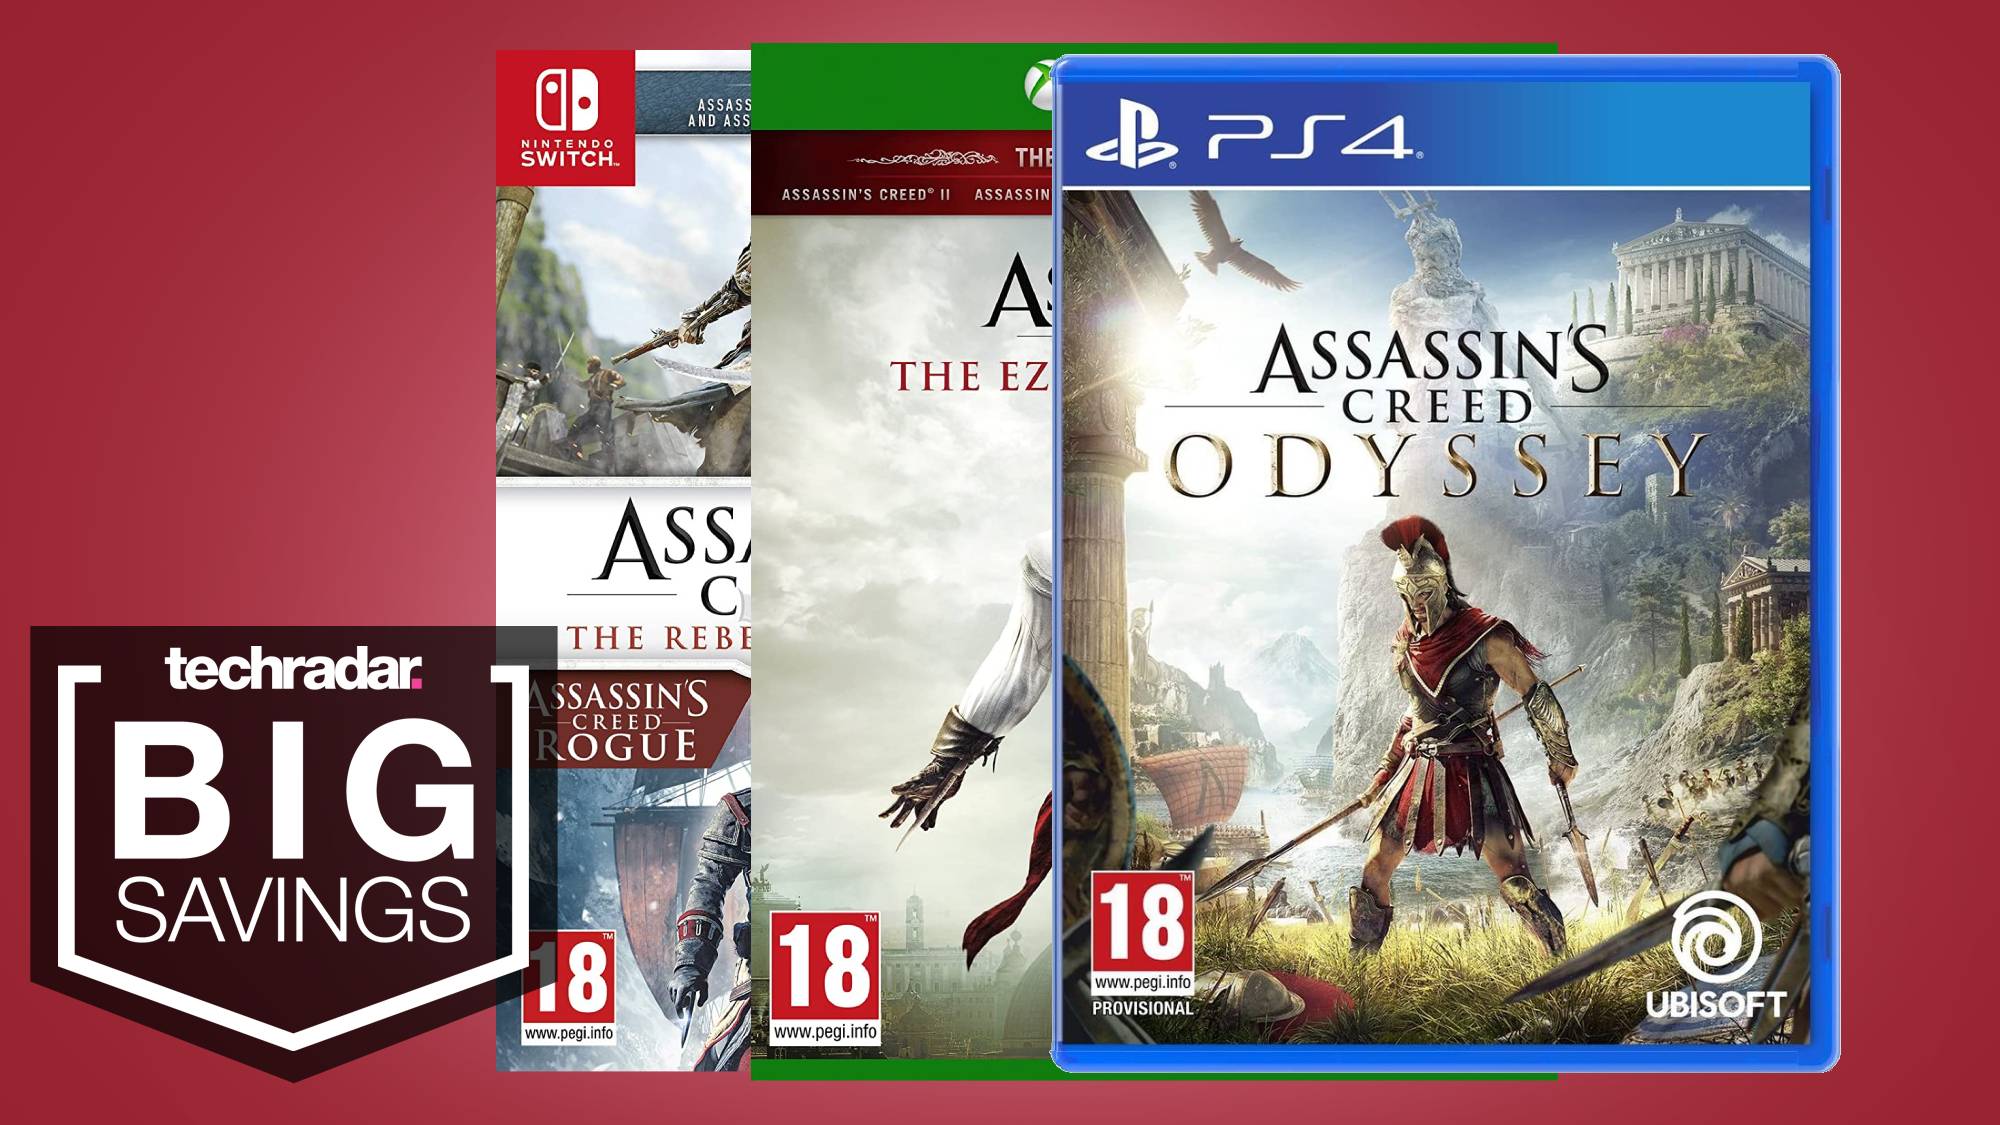 SALE!! Assassin's Creed® Bundle: Assassin's Creed® Valhalla, Assassin's  Creed® Odyssey, and Assassin's Creed®…